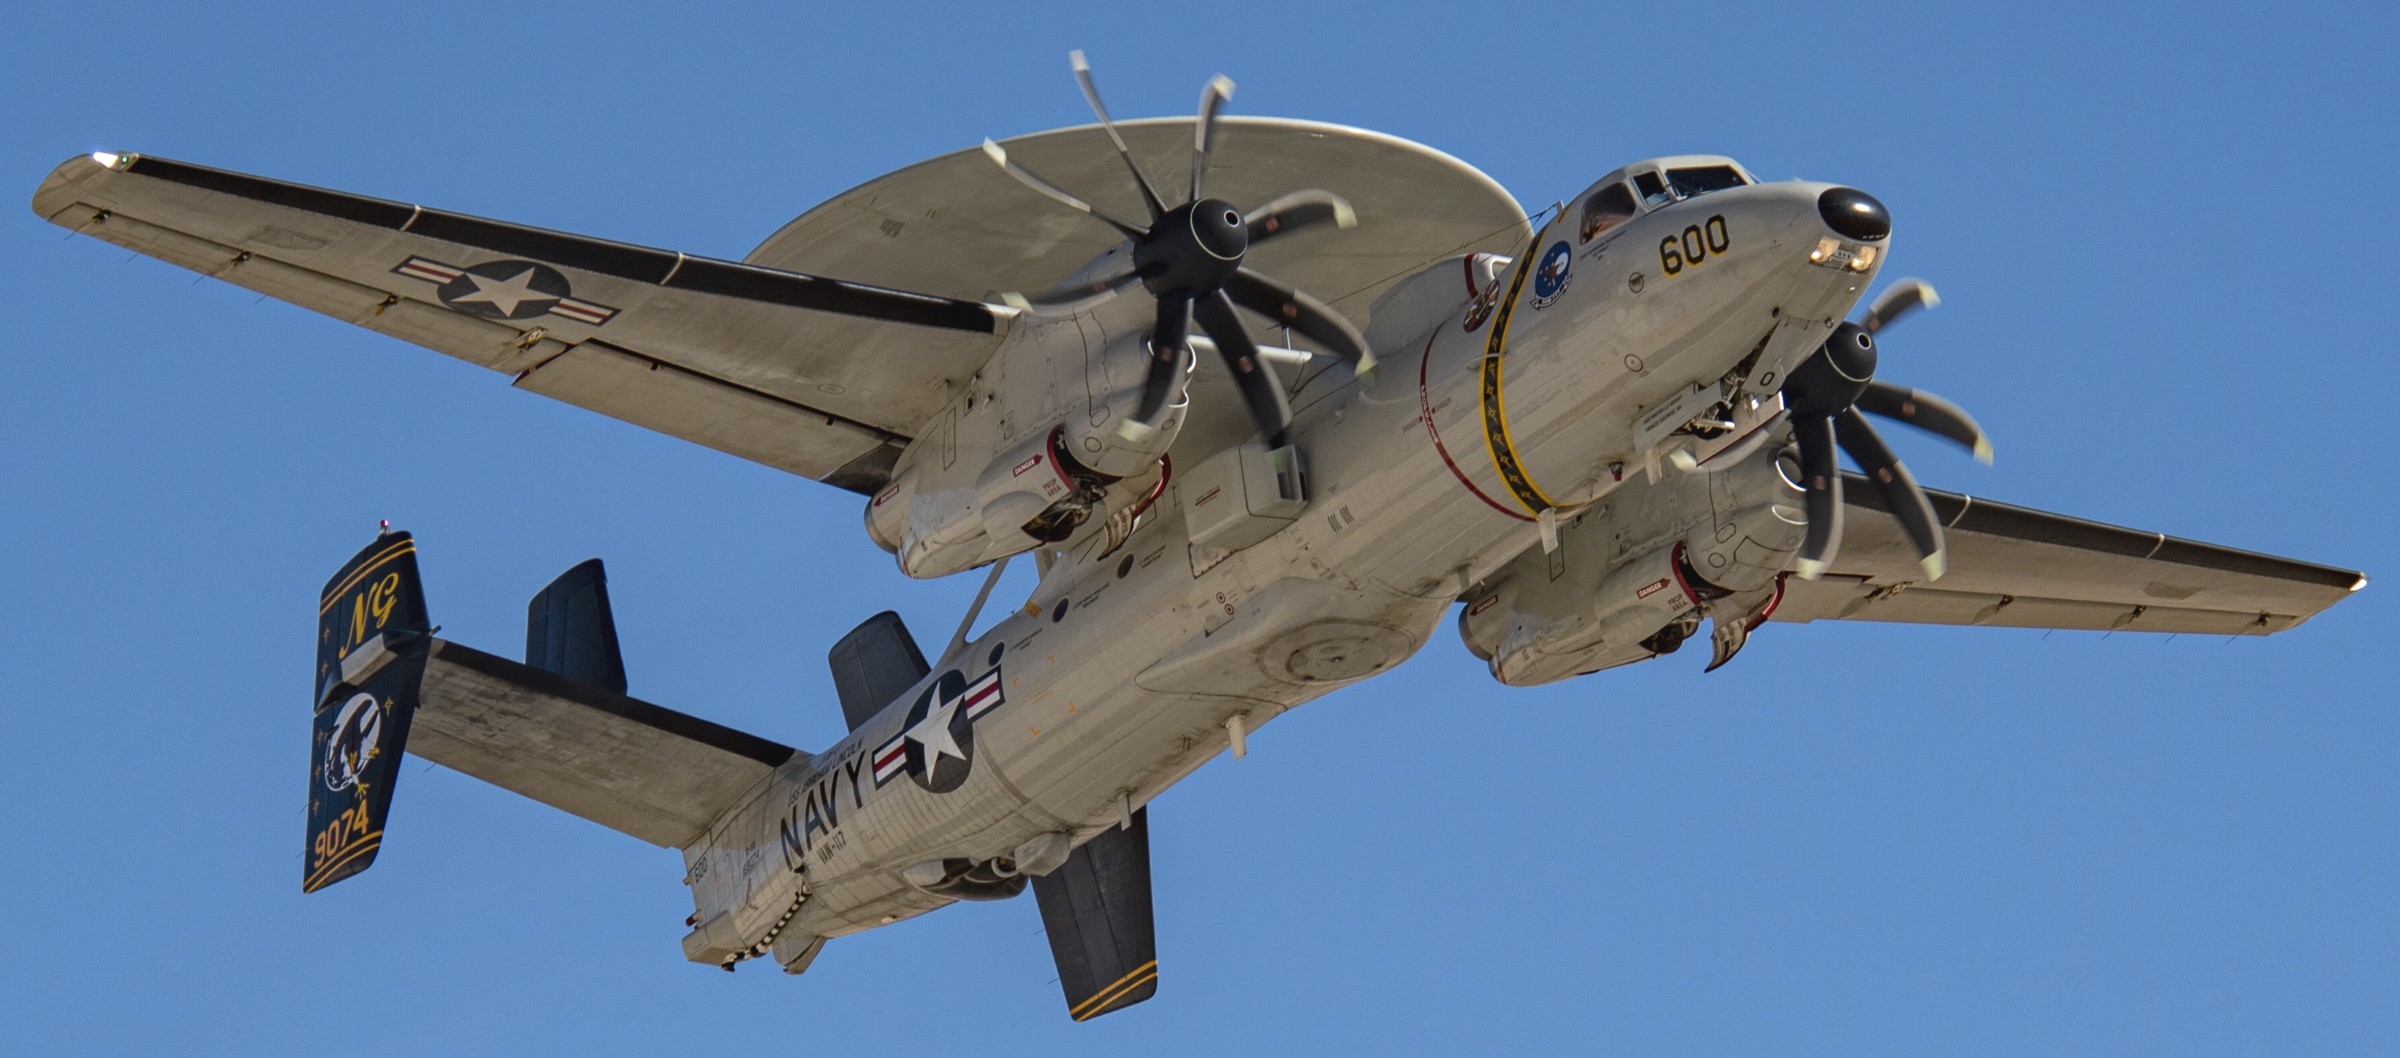 vaw-117 wallbangers airborne command and control squadron us navy naval base ventura county point mugu california 39x